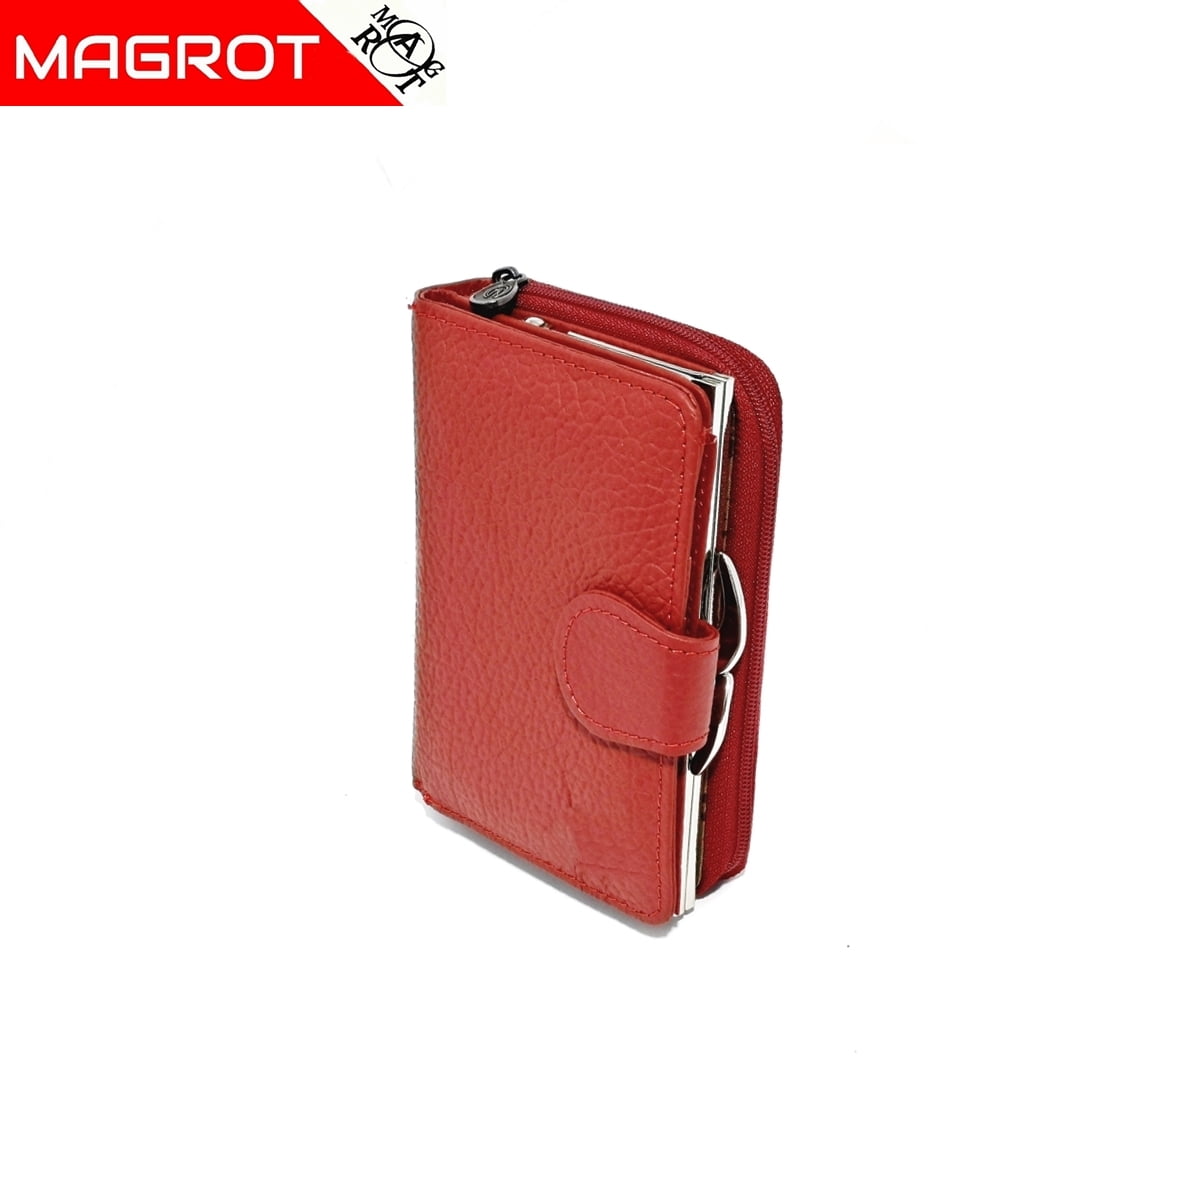 enthusiastic Brother gain Portofel dama, mic din piele naturala, 1035 red - Magrot shop